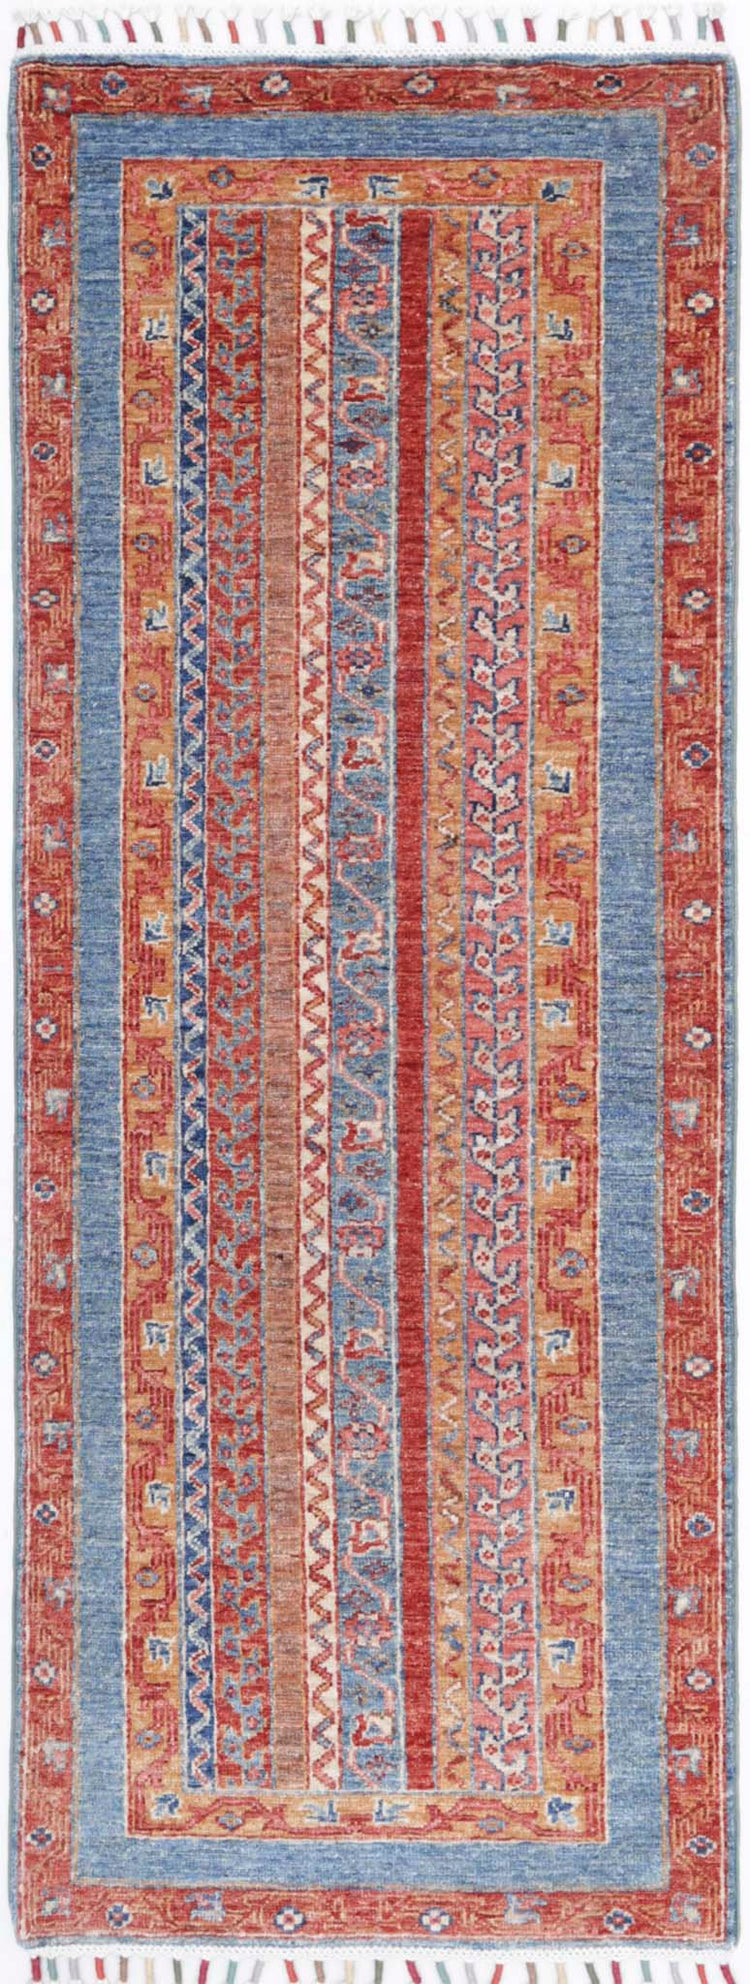 Traditional Hand Knotted Shaal Farhan Wool Rug of Size 2'0'' X 5'8'' in Multi and Multi Colors - Made in Afghanistan